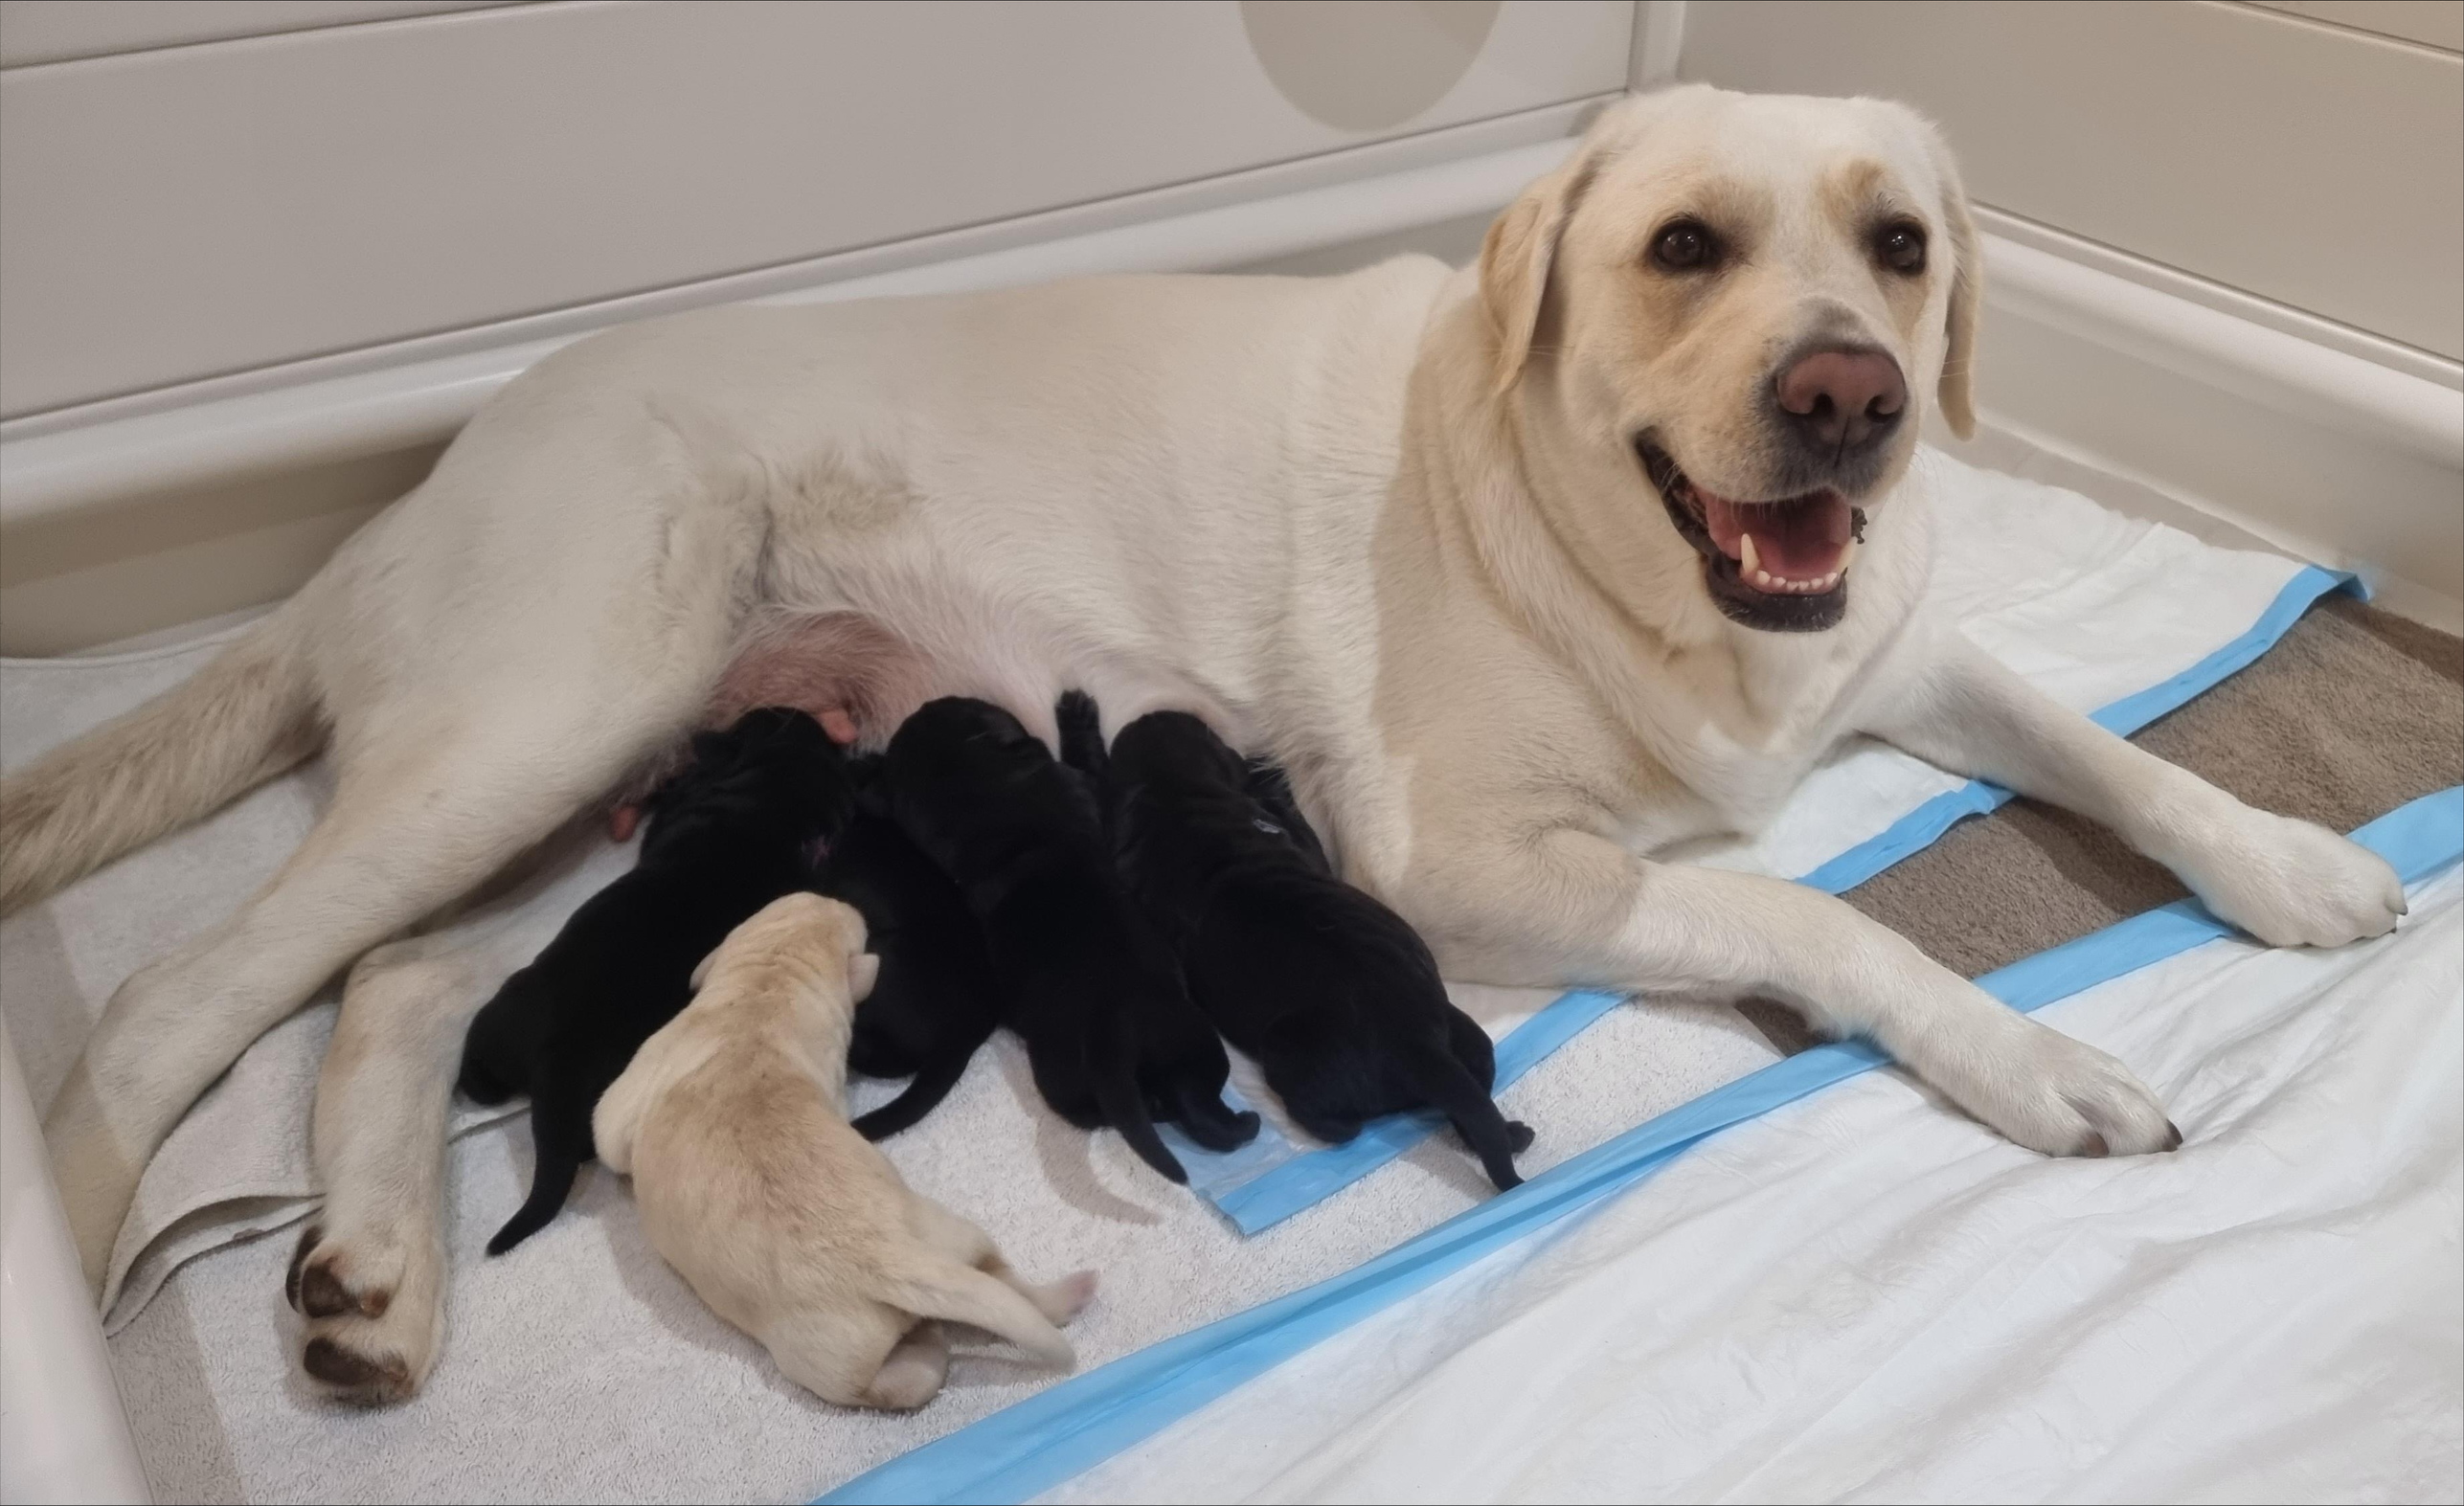 Mum Fifi and the Sydney Airport litter